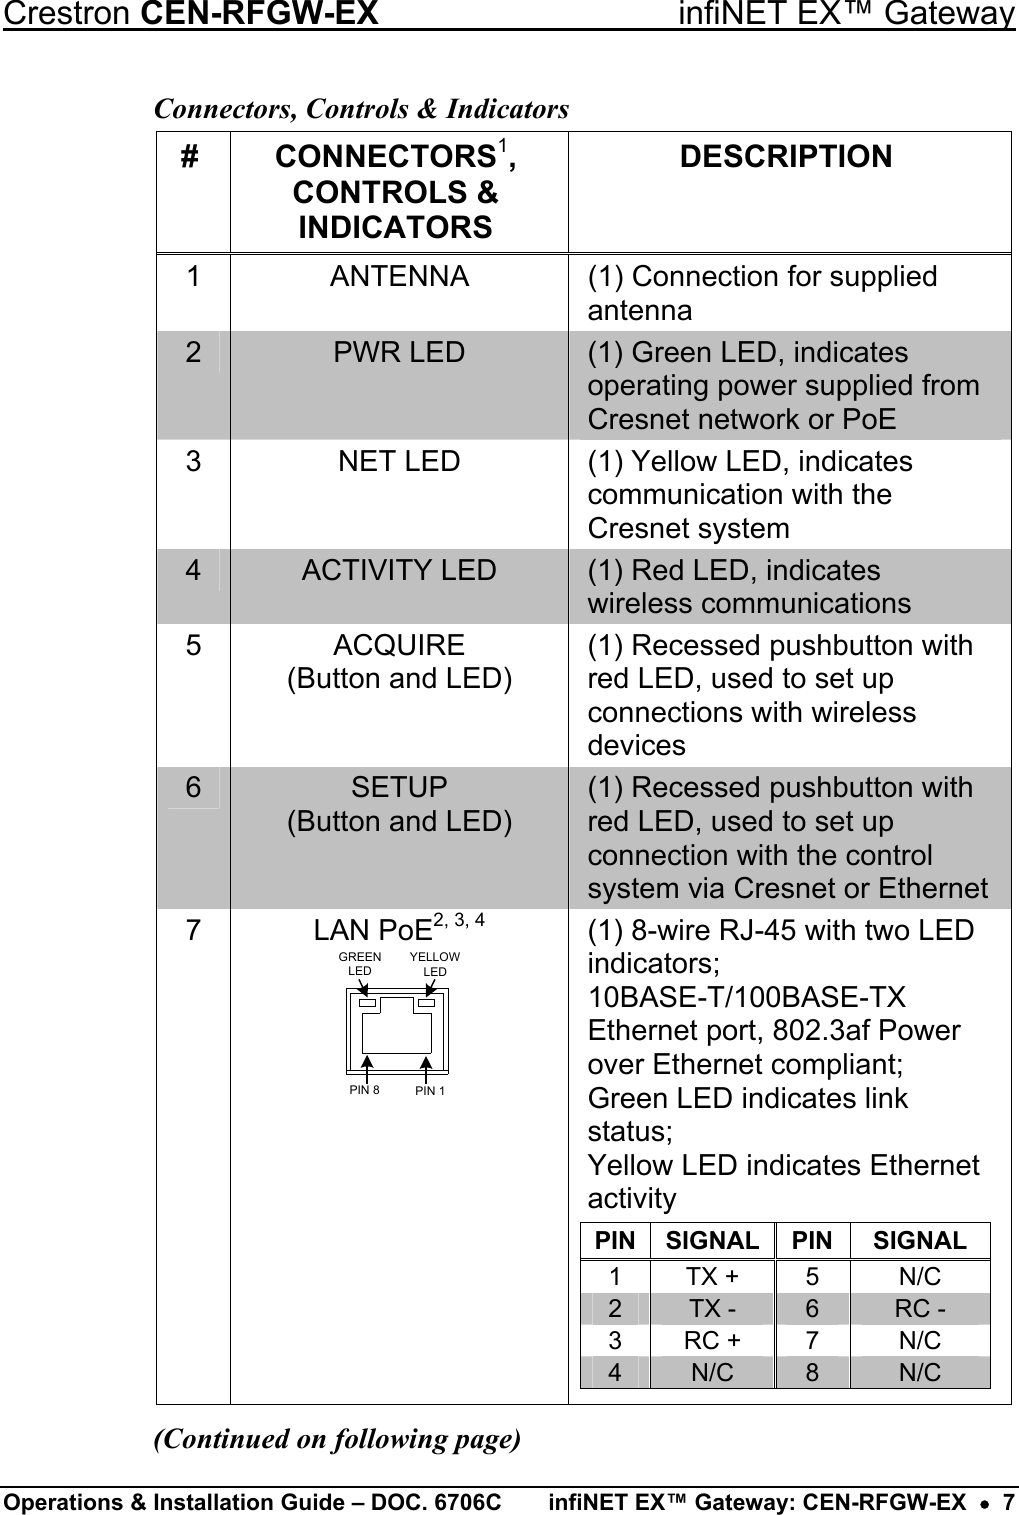 Crestron CEN-RFGW-EX  infiNET EX™ Gateway Connectors, Controls &amp; Indicators # CONNECTORS1, CONTROLS &amp; INDICATORS DESCRIPTION 1  ANTENNA  (1) Connection for supplied antenna 2  PWR LED  (1) Green LED, indicates operating power supplied from Cresnet network or PoE 3  NET LED  (1) Yellow LED, indicates communication with the Cresnet system 4  ACTIVITY LED  (1) Red LED, indicates wireless communications 5 ACQUIRE  (Button and LED) (1) Recessed pushbutton with red LED, used to set up connections with wireless devices 6  SETUP (Button and LED) (1) Recessed pushbutton with red LED, used to set up connection with the control system via Cresnet or Ethernet 7 LAN PoE2, 3, 4 GREENLEDYELLOWLEDPIN 8 PIN 1  (1) 8-wire RJ-45 with two LED indicators; 10BASE-T/100BASE-TX Ethernet port, 802.3af Power over Ethernet compliant; Green LED indicates link status; Yellow LED indicates Ethernet activity  PIN SIGNAL  PIN  SIGNAL 1  TX +  5  N/C 2  TX -  6  RC - 3  RC +  7  N/C 4  N/C  8  N/C  (Continued on following page) Operations &amp; Installation Guide – DOC. 6706C  infiNET EX™ Gateway: CEN-RFGW-EX  •  7 